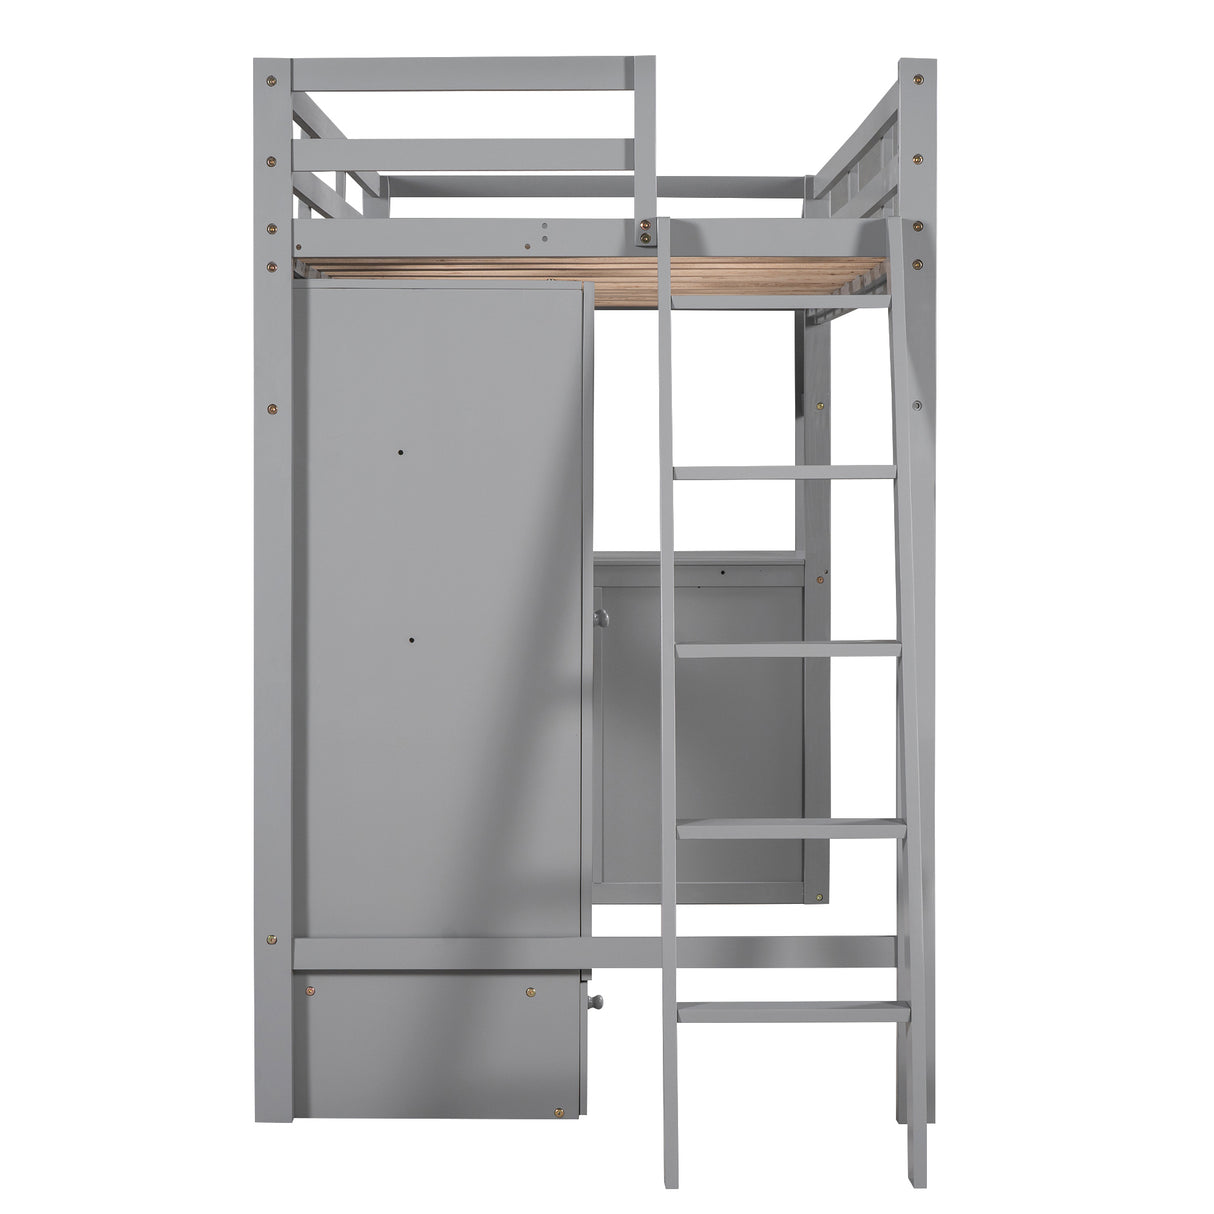 Twin Size Loft Bed with Wardrobe and Drawers, attached Desk with Shelves, Gray - Home Elegance USA